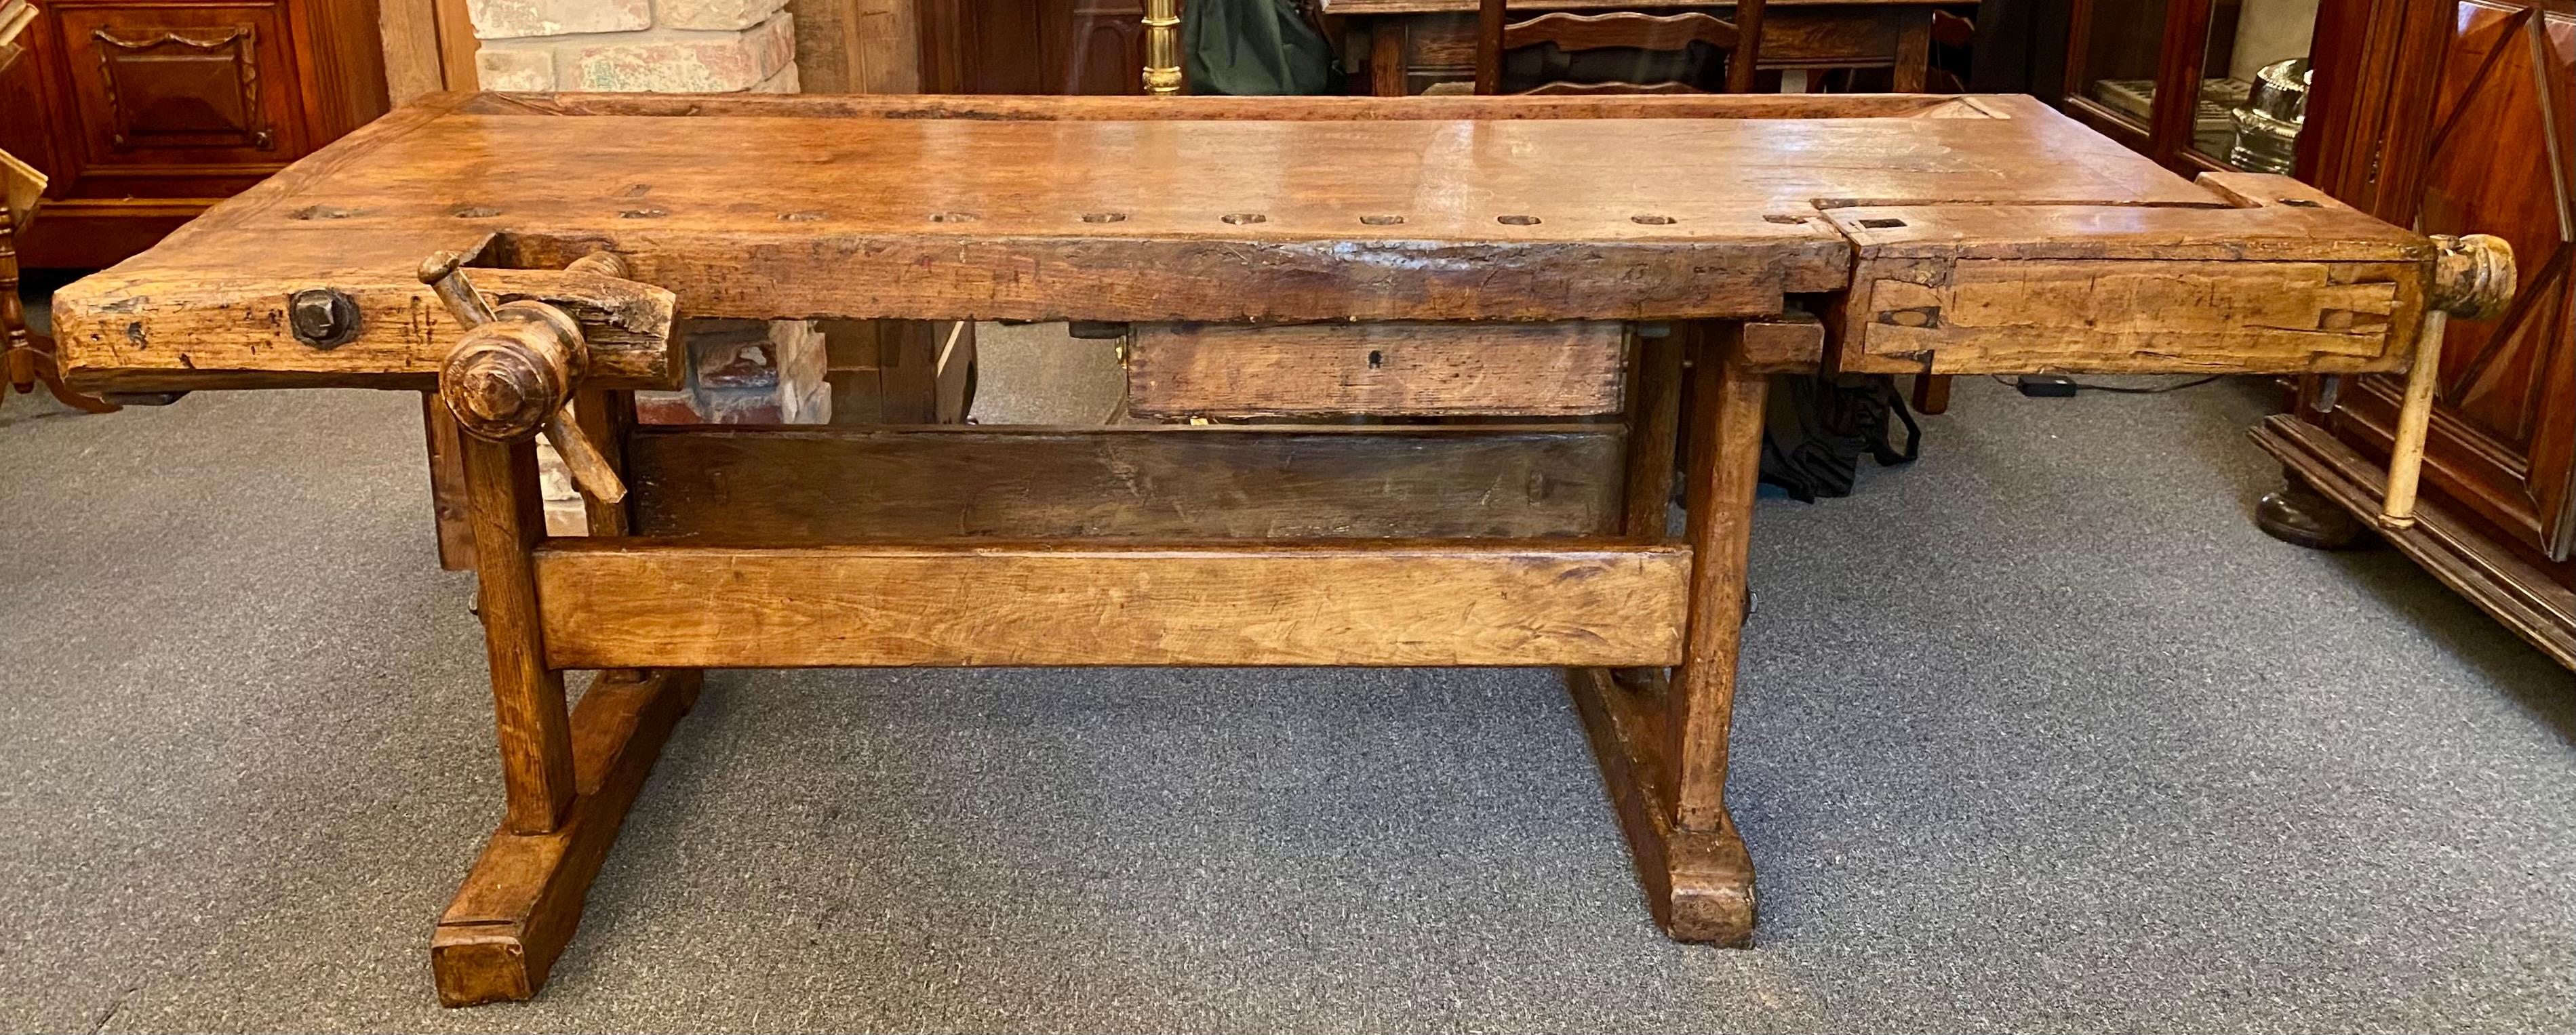 Antique Belgian woodcarver's heavy oak workbench with drawer and working vises, circa 1900.
Measures: 29-1/2